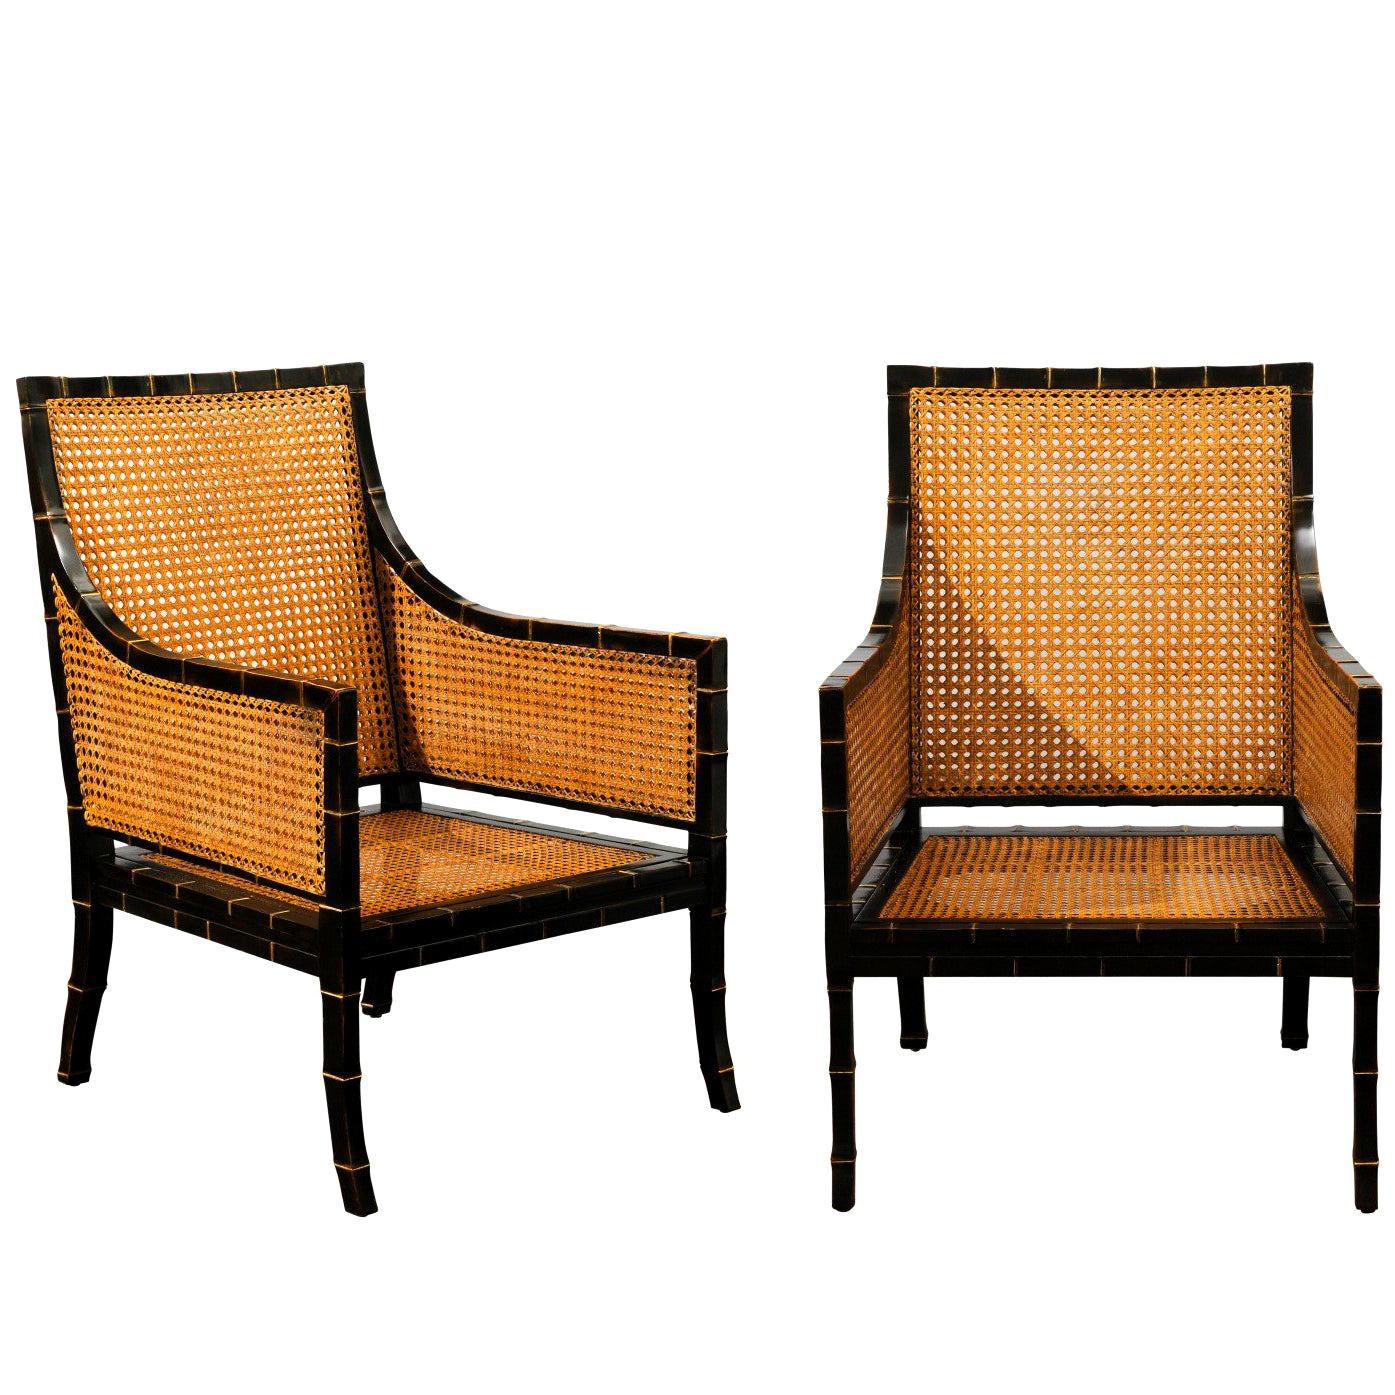 Beautiful Pair of Large Scale Double-Sided Cane Club Chairs - 2 Pair Available